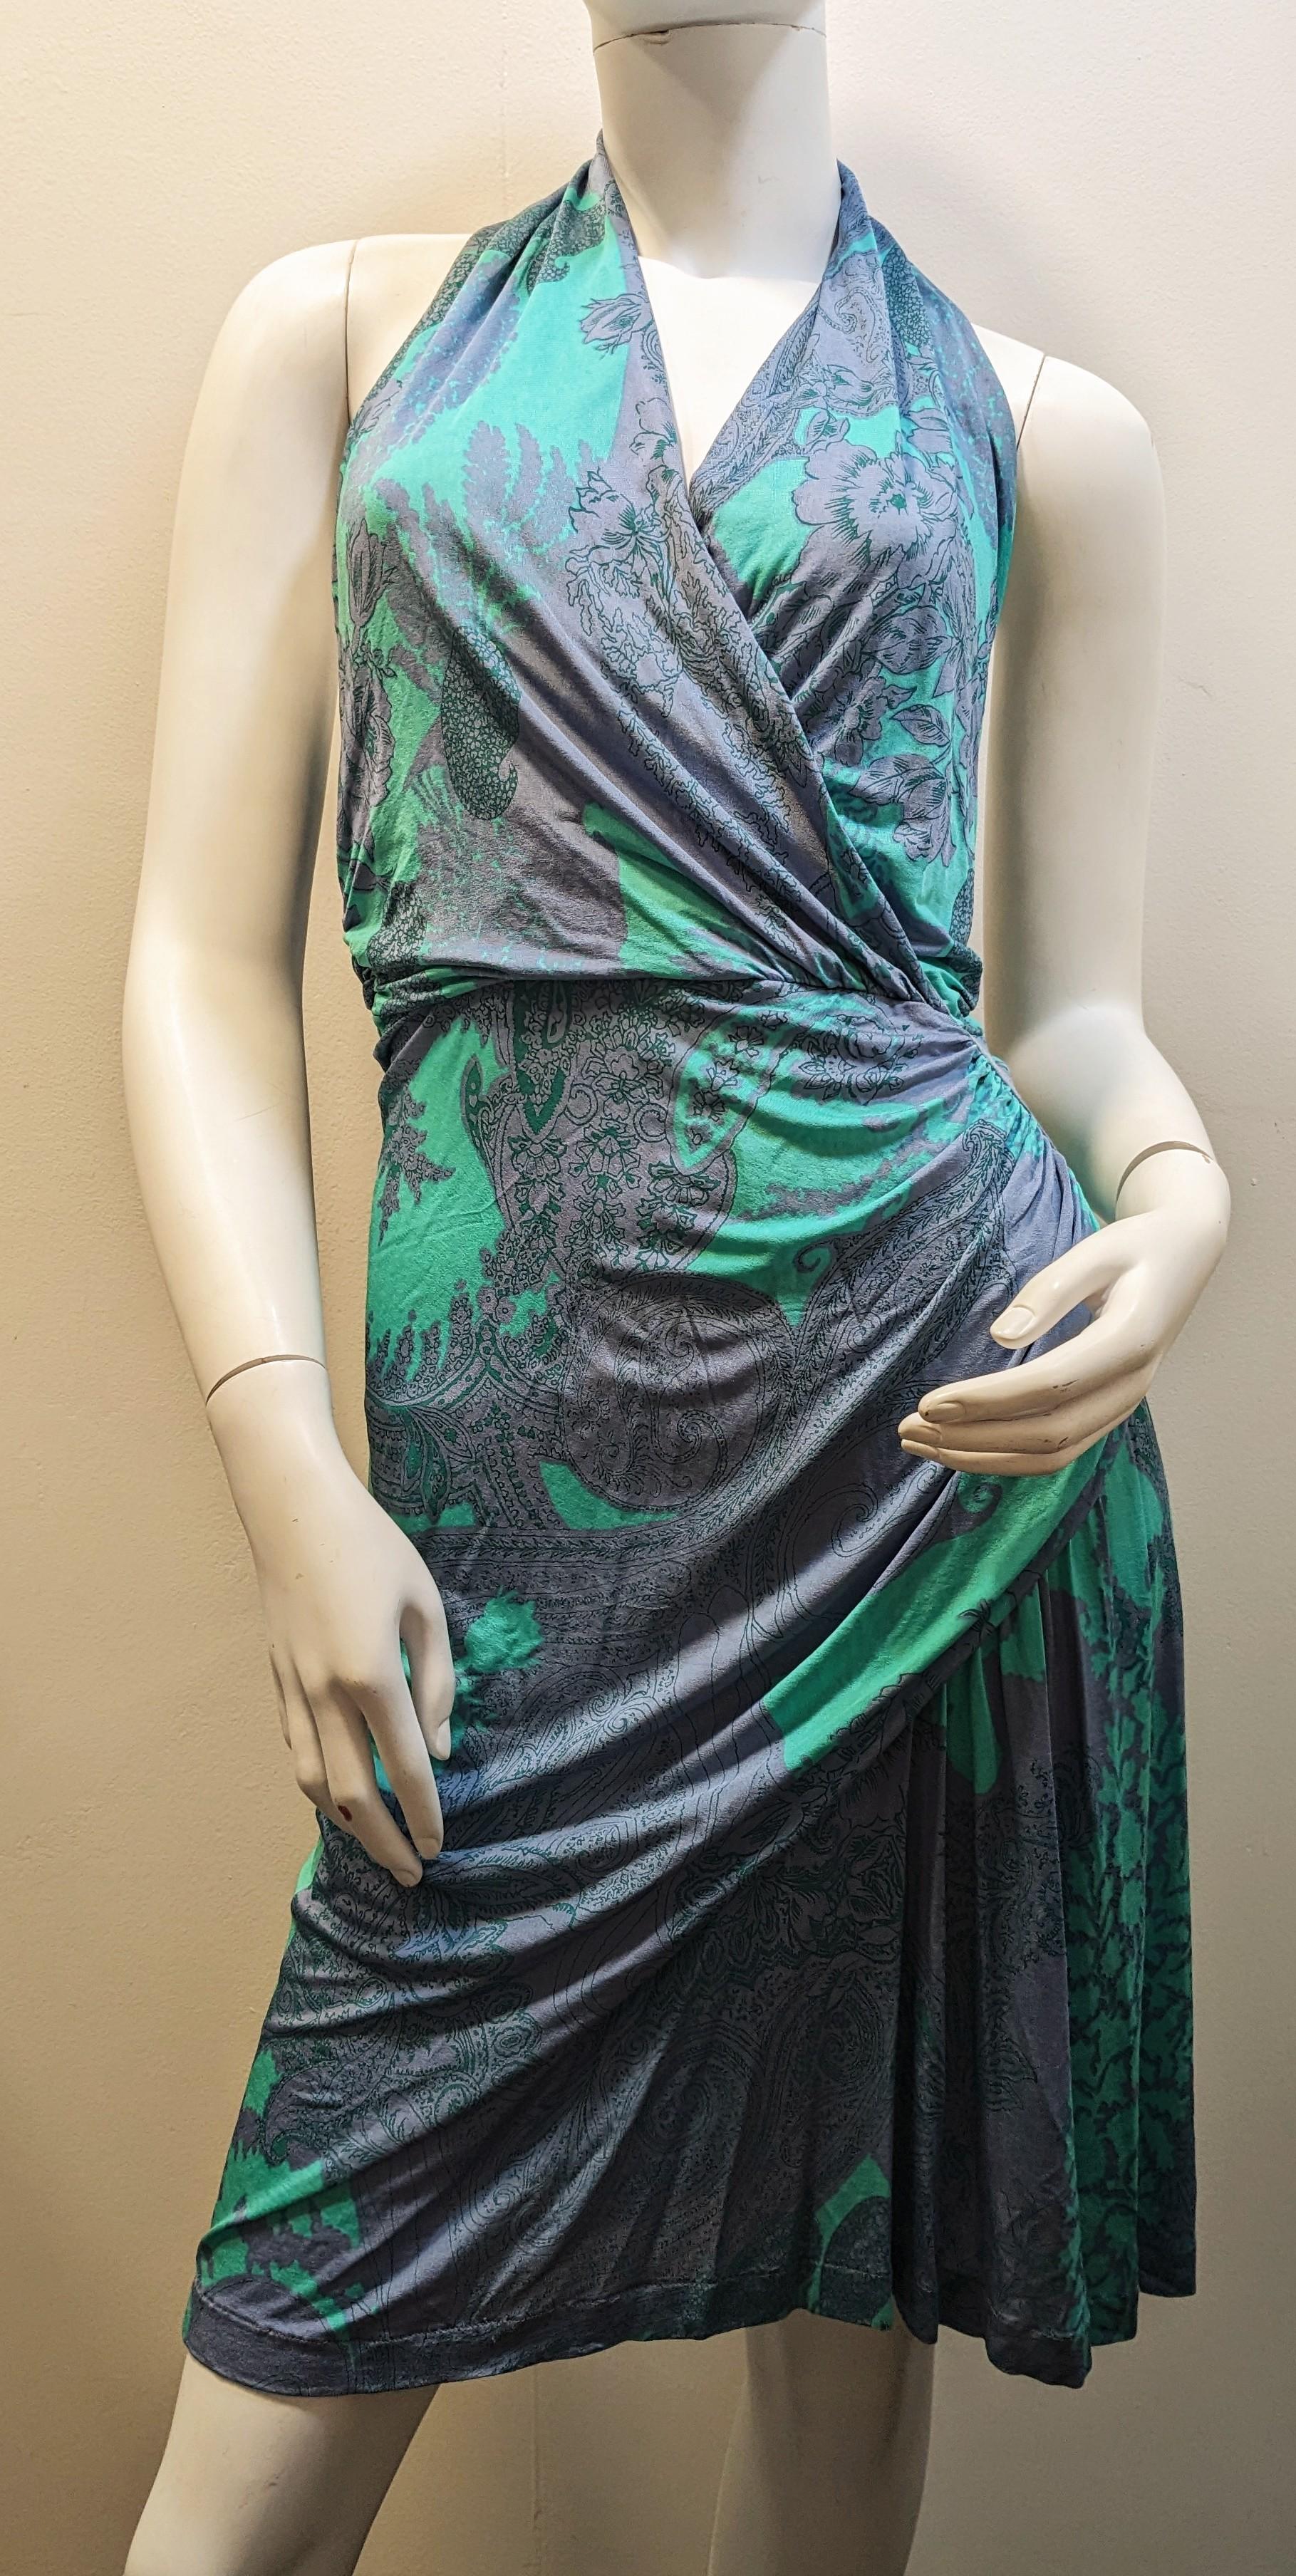 ETRO dress made in Milano Italy Etro
ETRO dress tied at the neck with bare back
Paisley print
Color  Green and Violet
Dress length  102cm
Size  42

Since its creation in 1968, Etro has managed to keep the fashion world on edge with its now